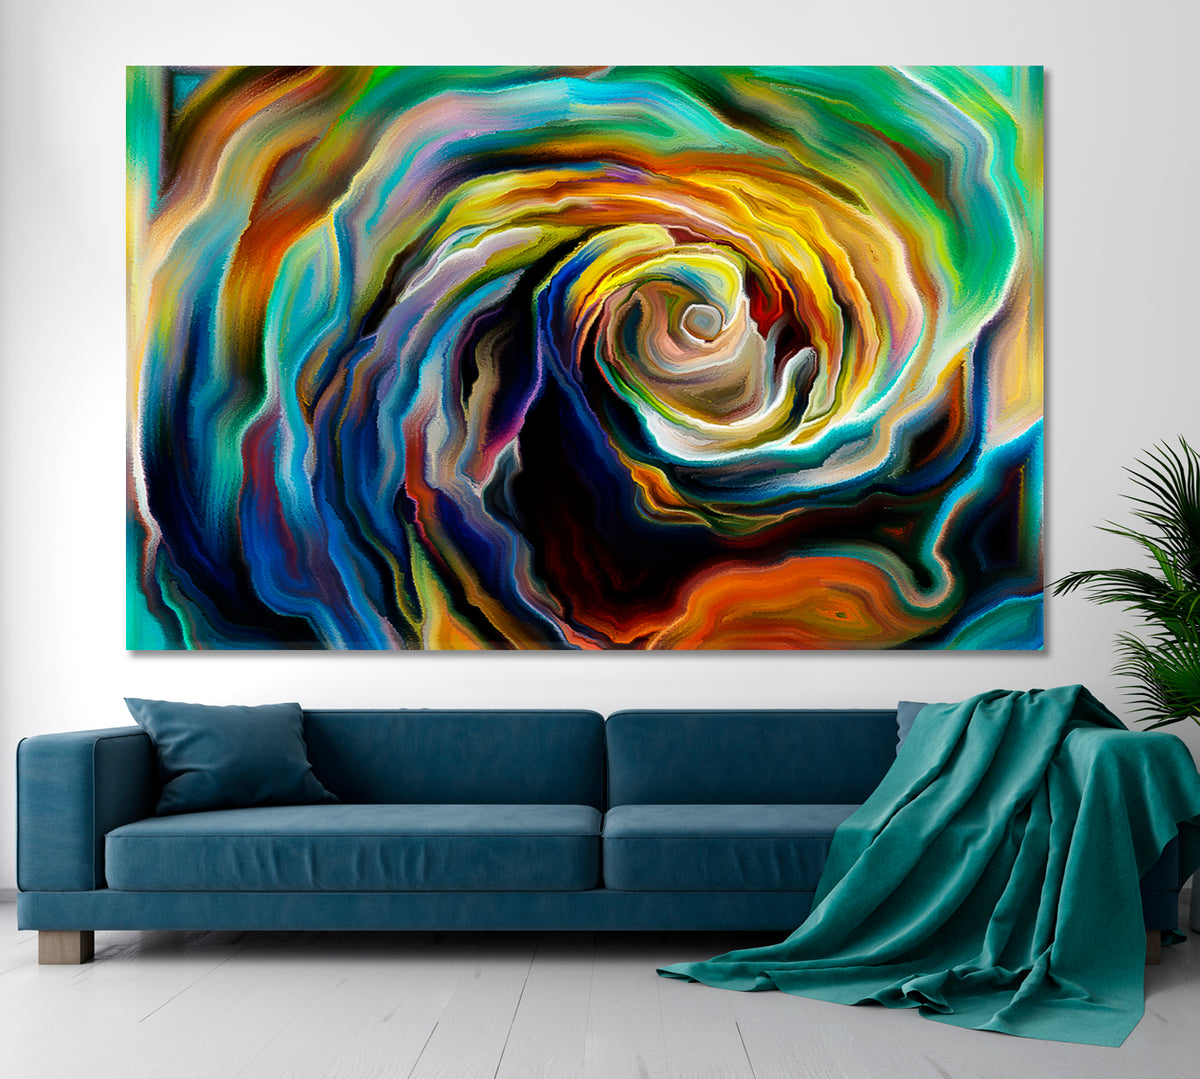 Abstract Forms and Nature Abstract Art Print Artesty 1 panel 24" x 16" 